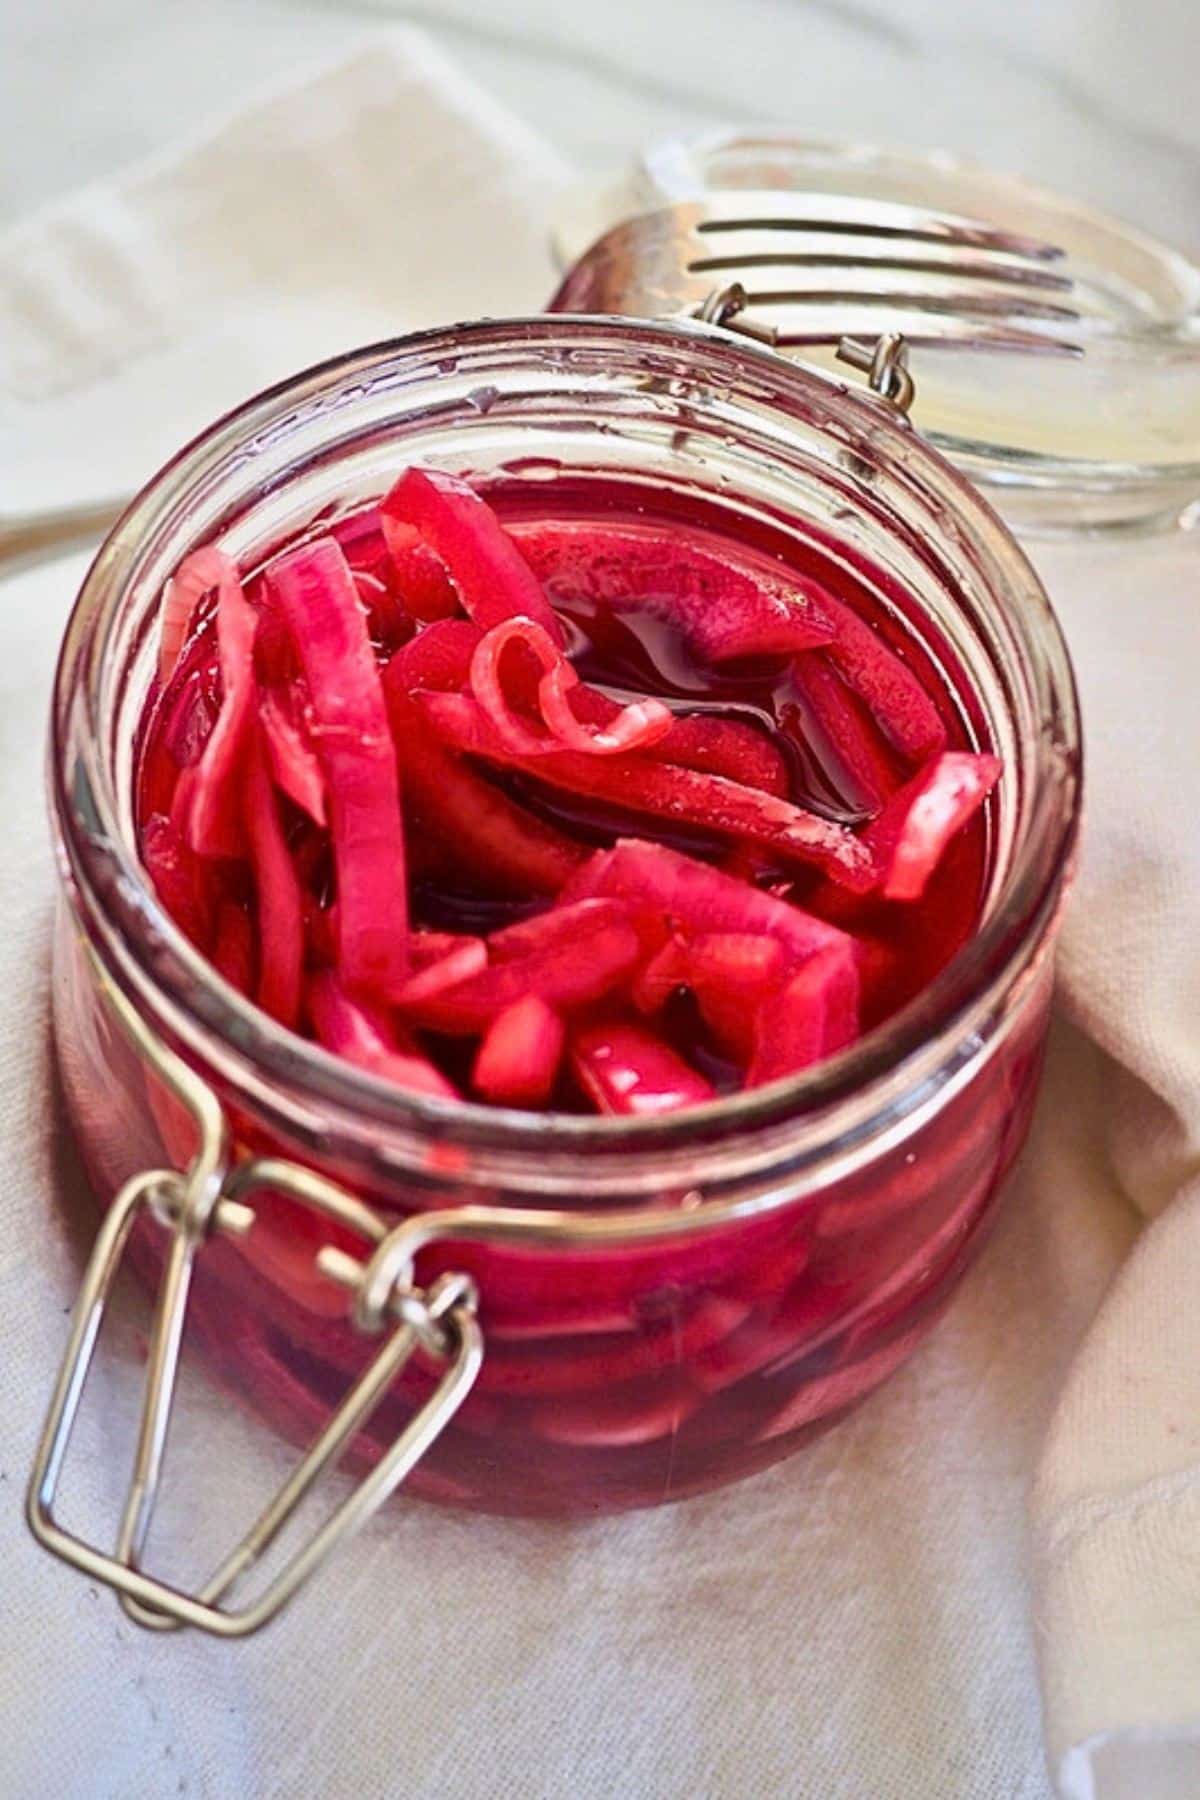 Refrigerator pickled red onions in a canning jar with a flip top.